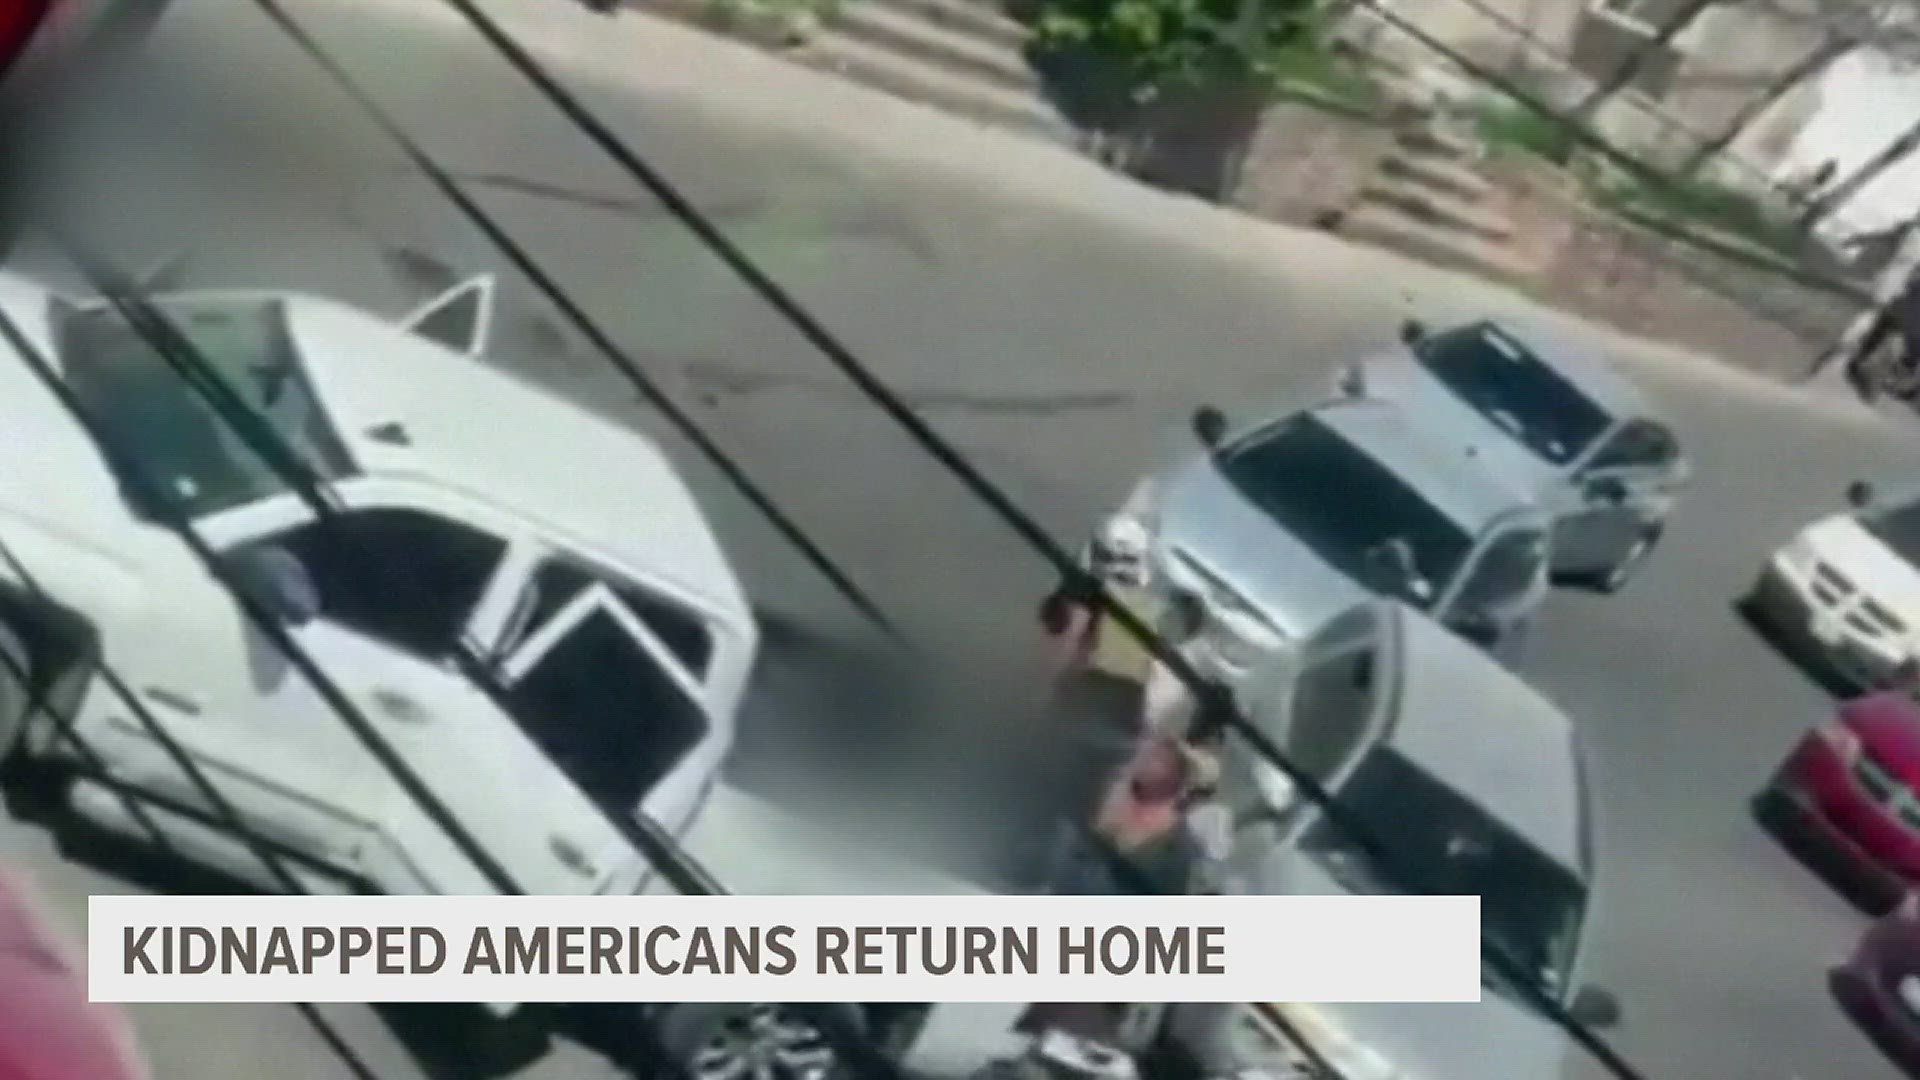 Four Americans were abducted last week when their van was caught in a shootout in Mexico.